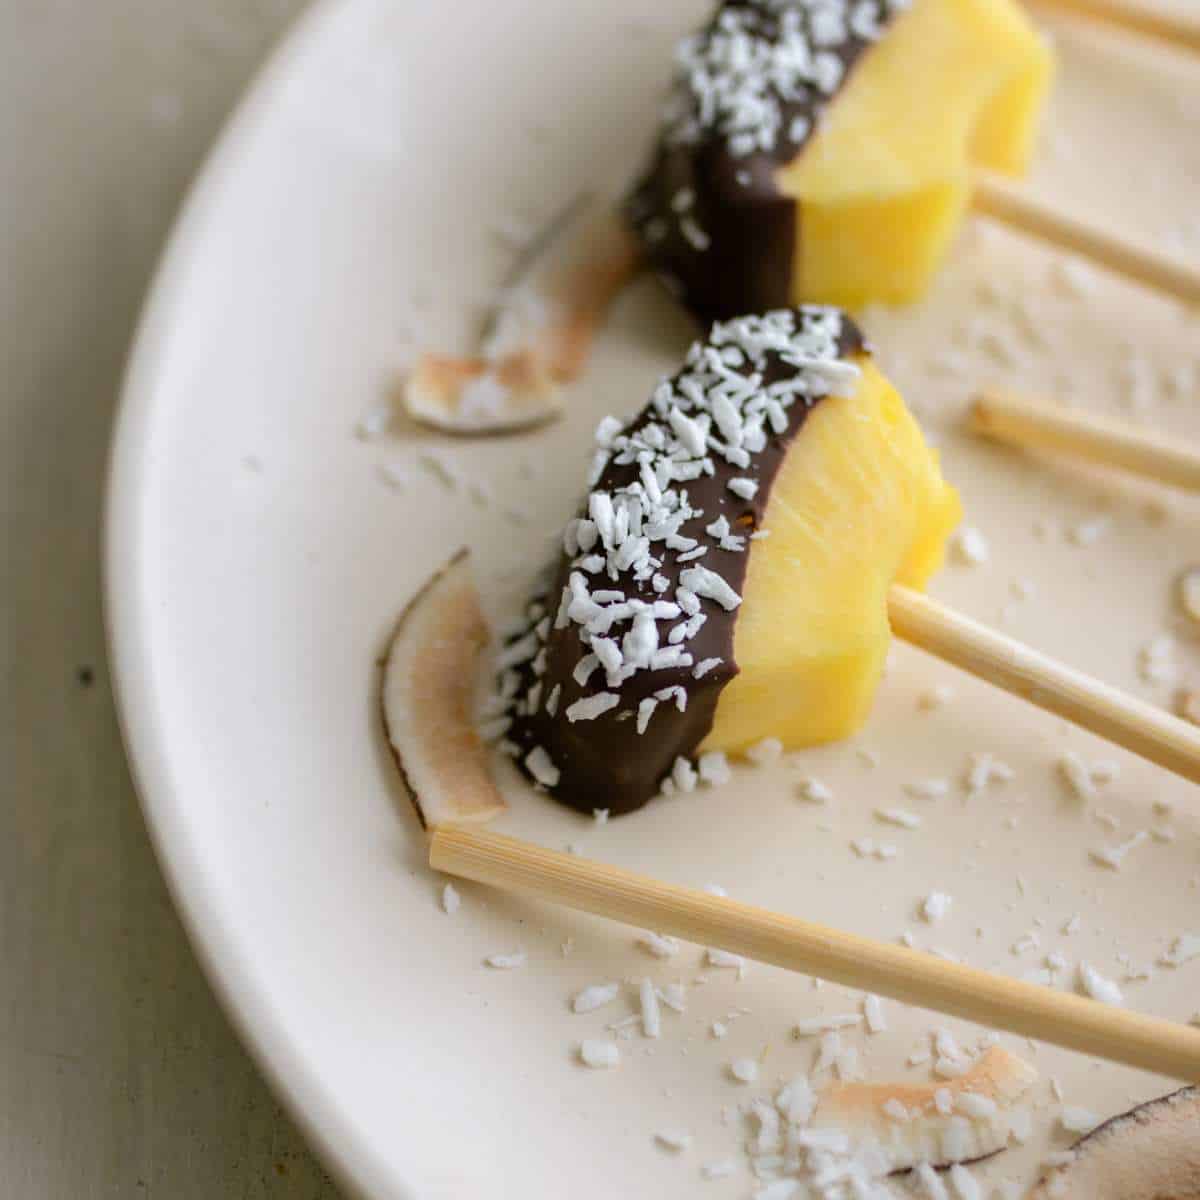 Chocolate covered pineapples with shredded coconut on a plate.